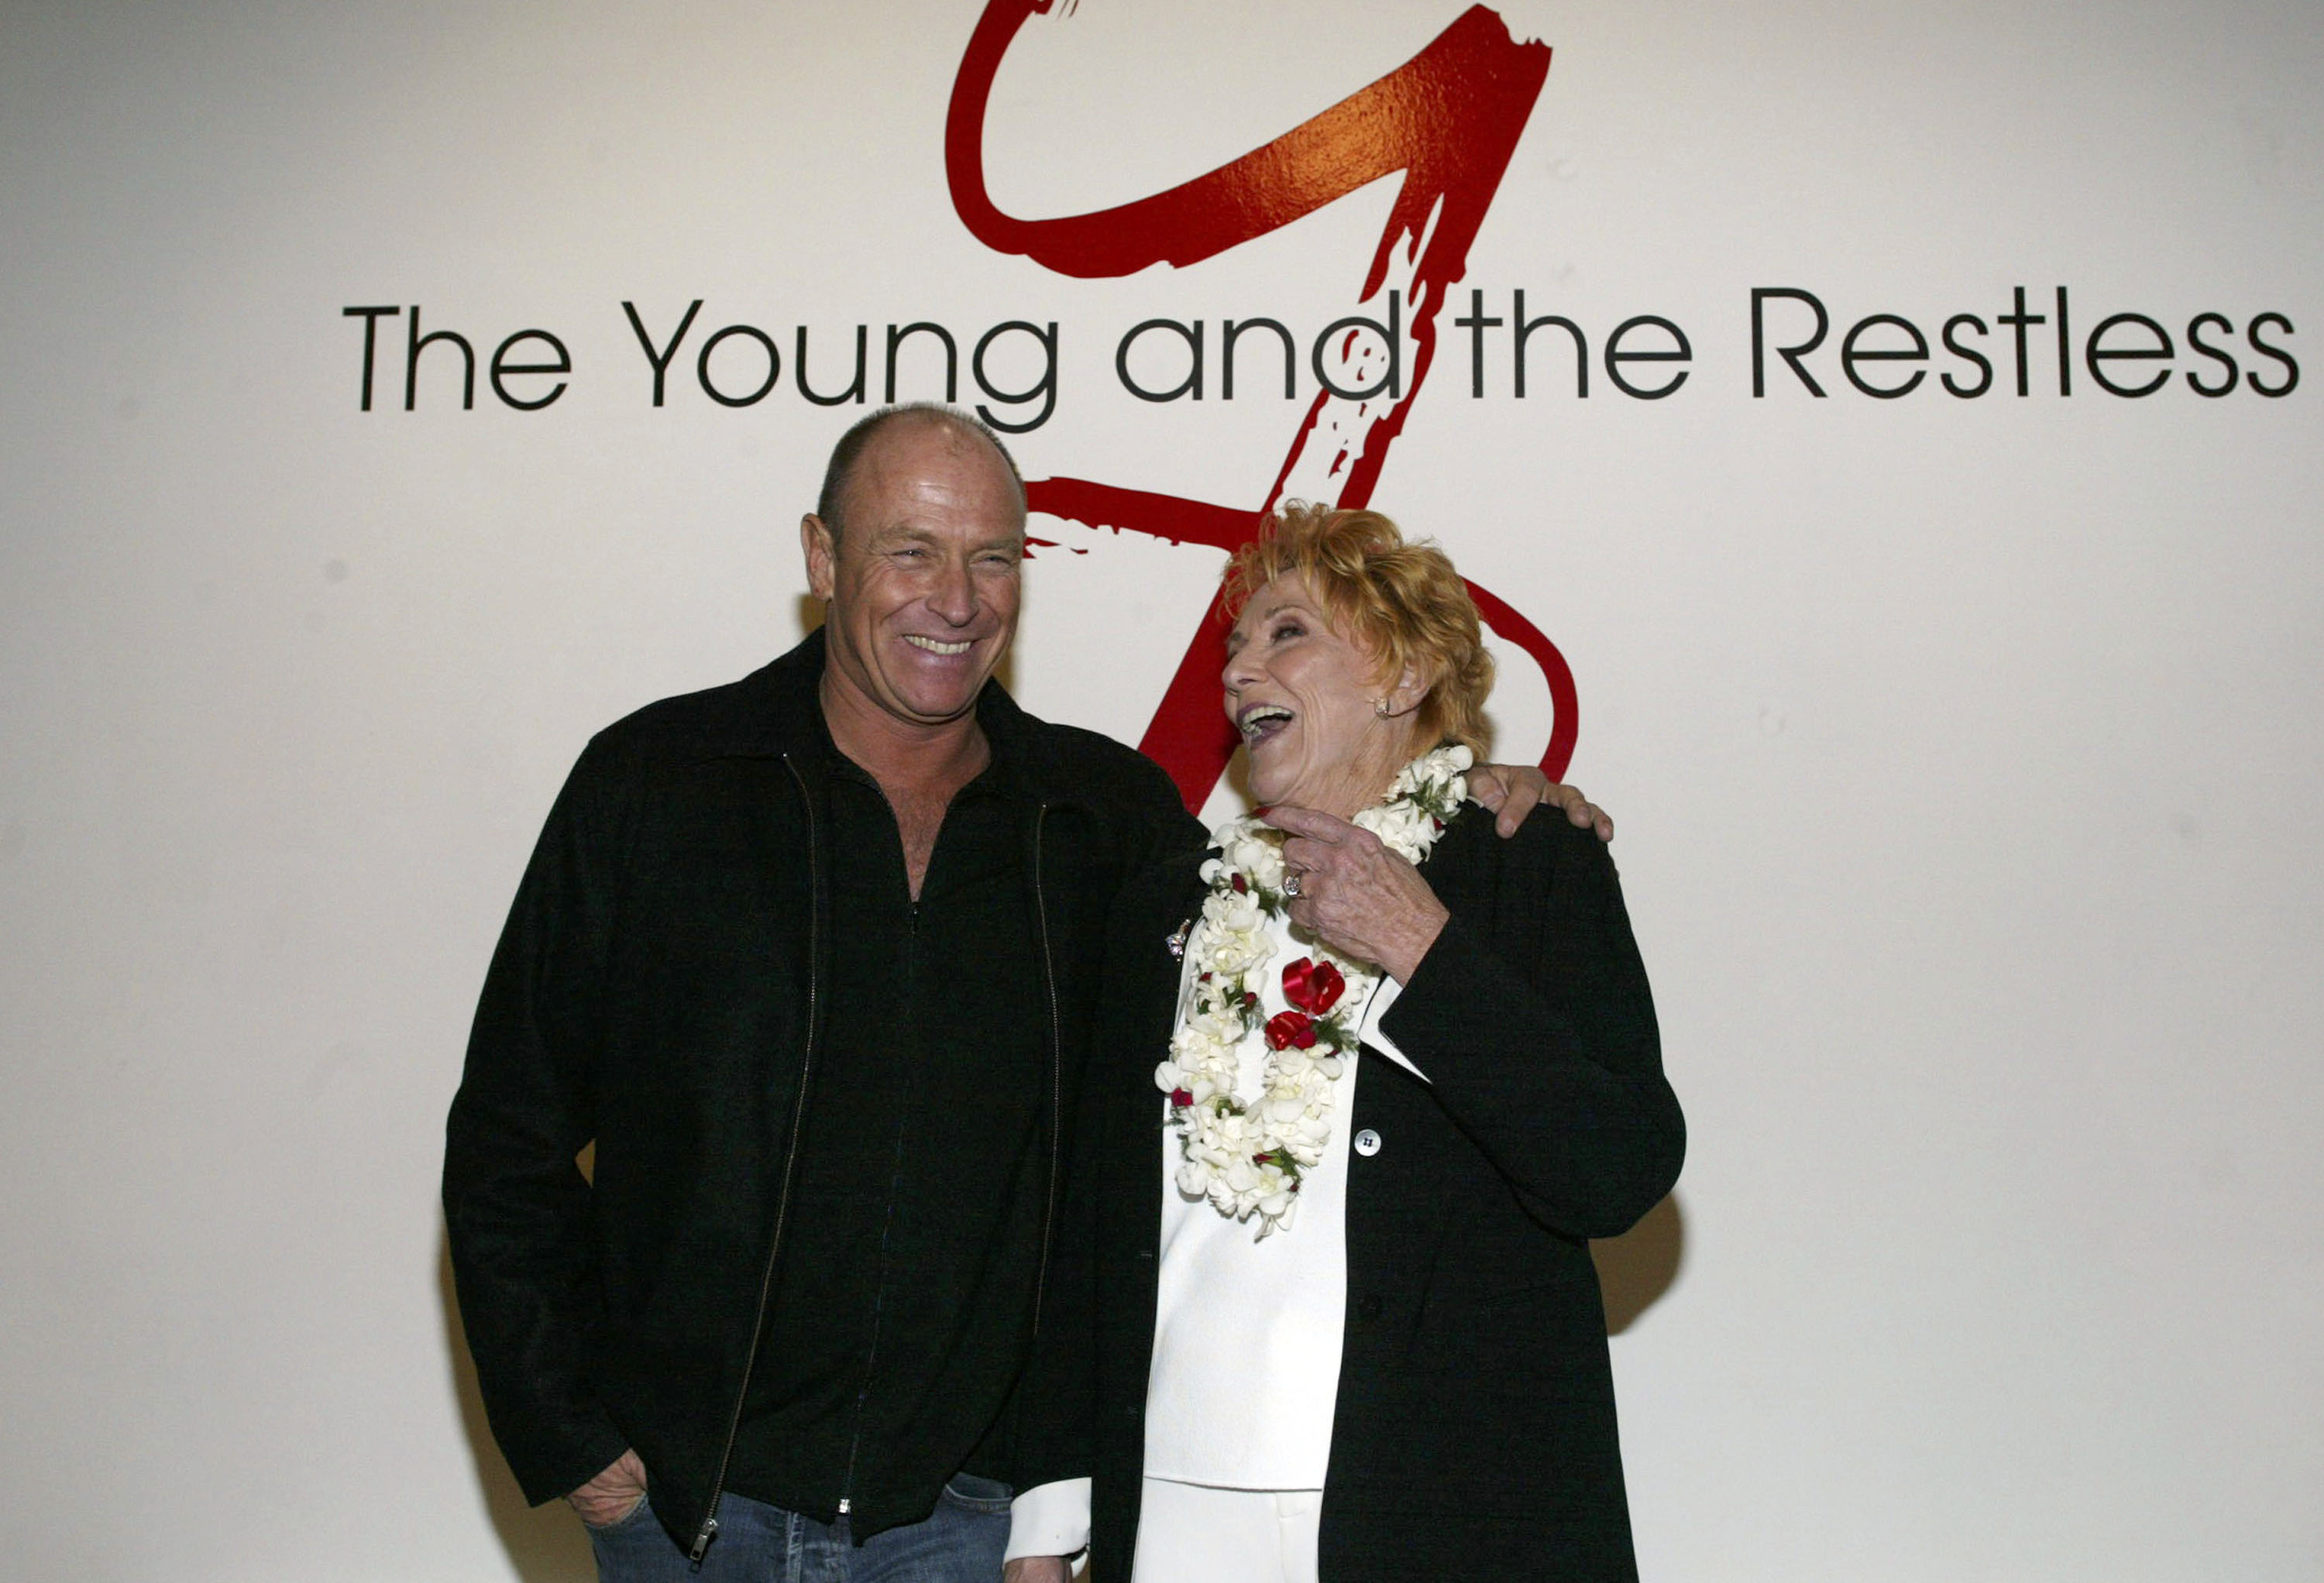 Corbin Bersen and his mother Jeanne Cooper at the "The Young and the Restless" celebration for actress Jeanne Cooper's 30th year anniversary on the show at CBS Television City on January 28, 2004 in Los Angeles, California. | Source: Getty Images